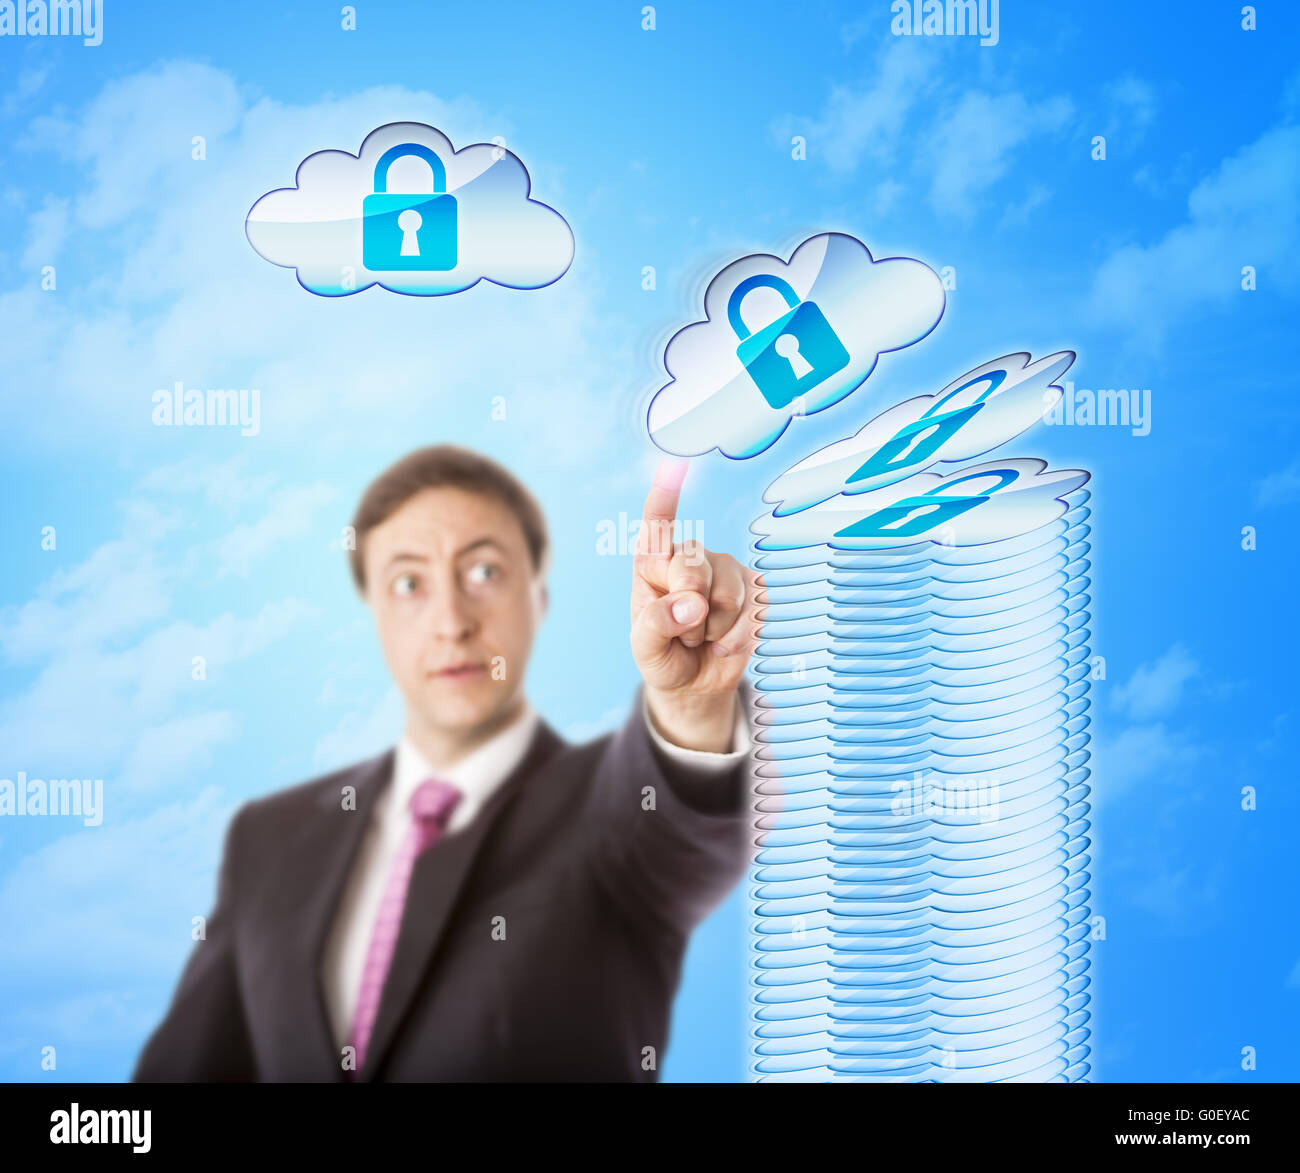 Stacking Cloud Objects In Secure Storage Stock Photo